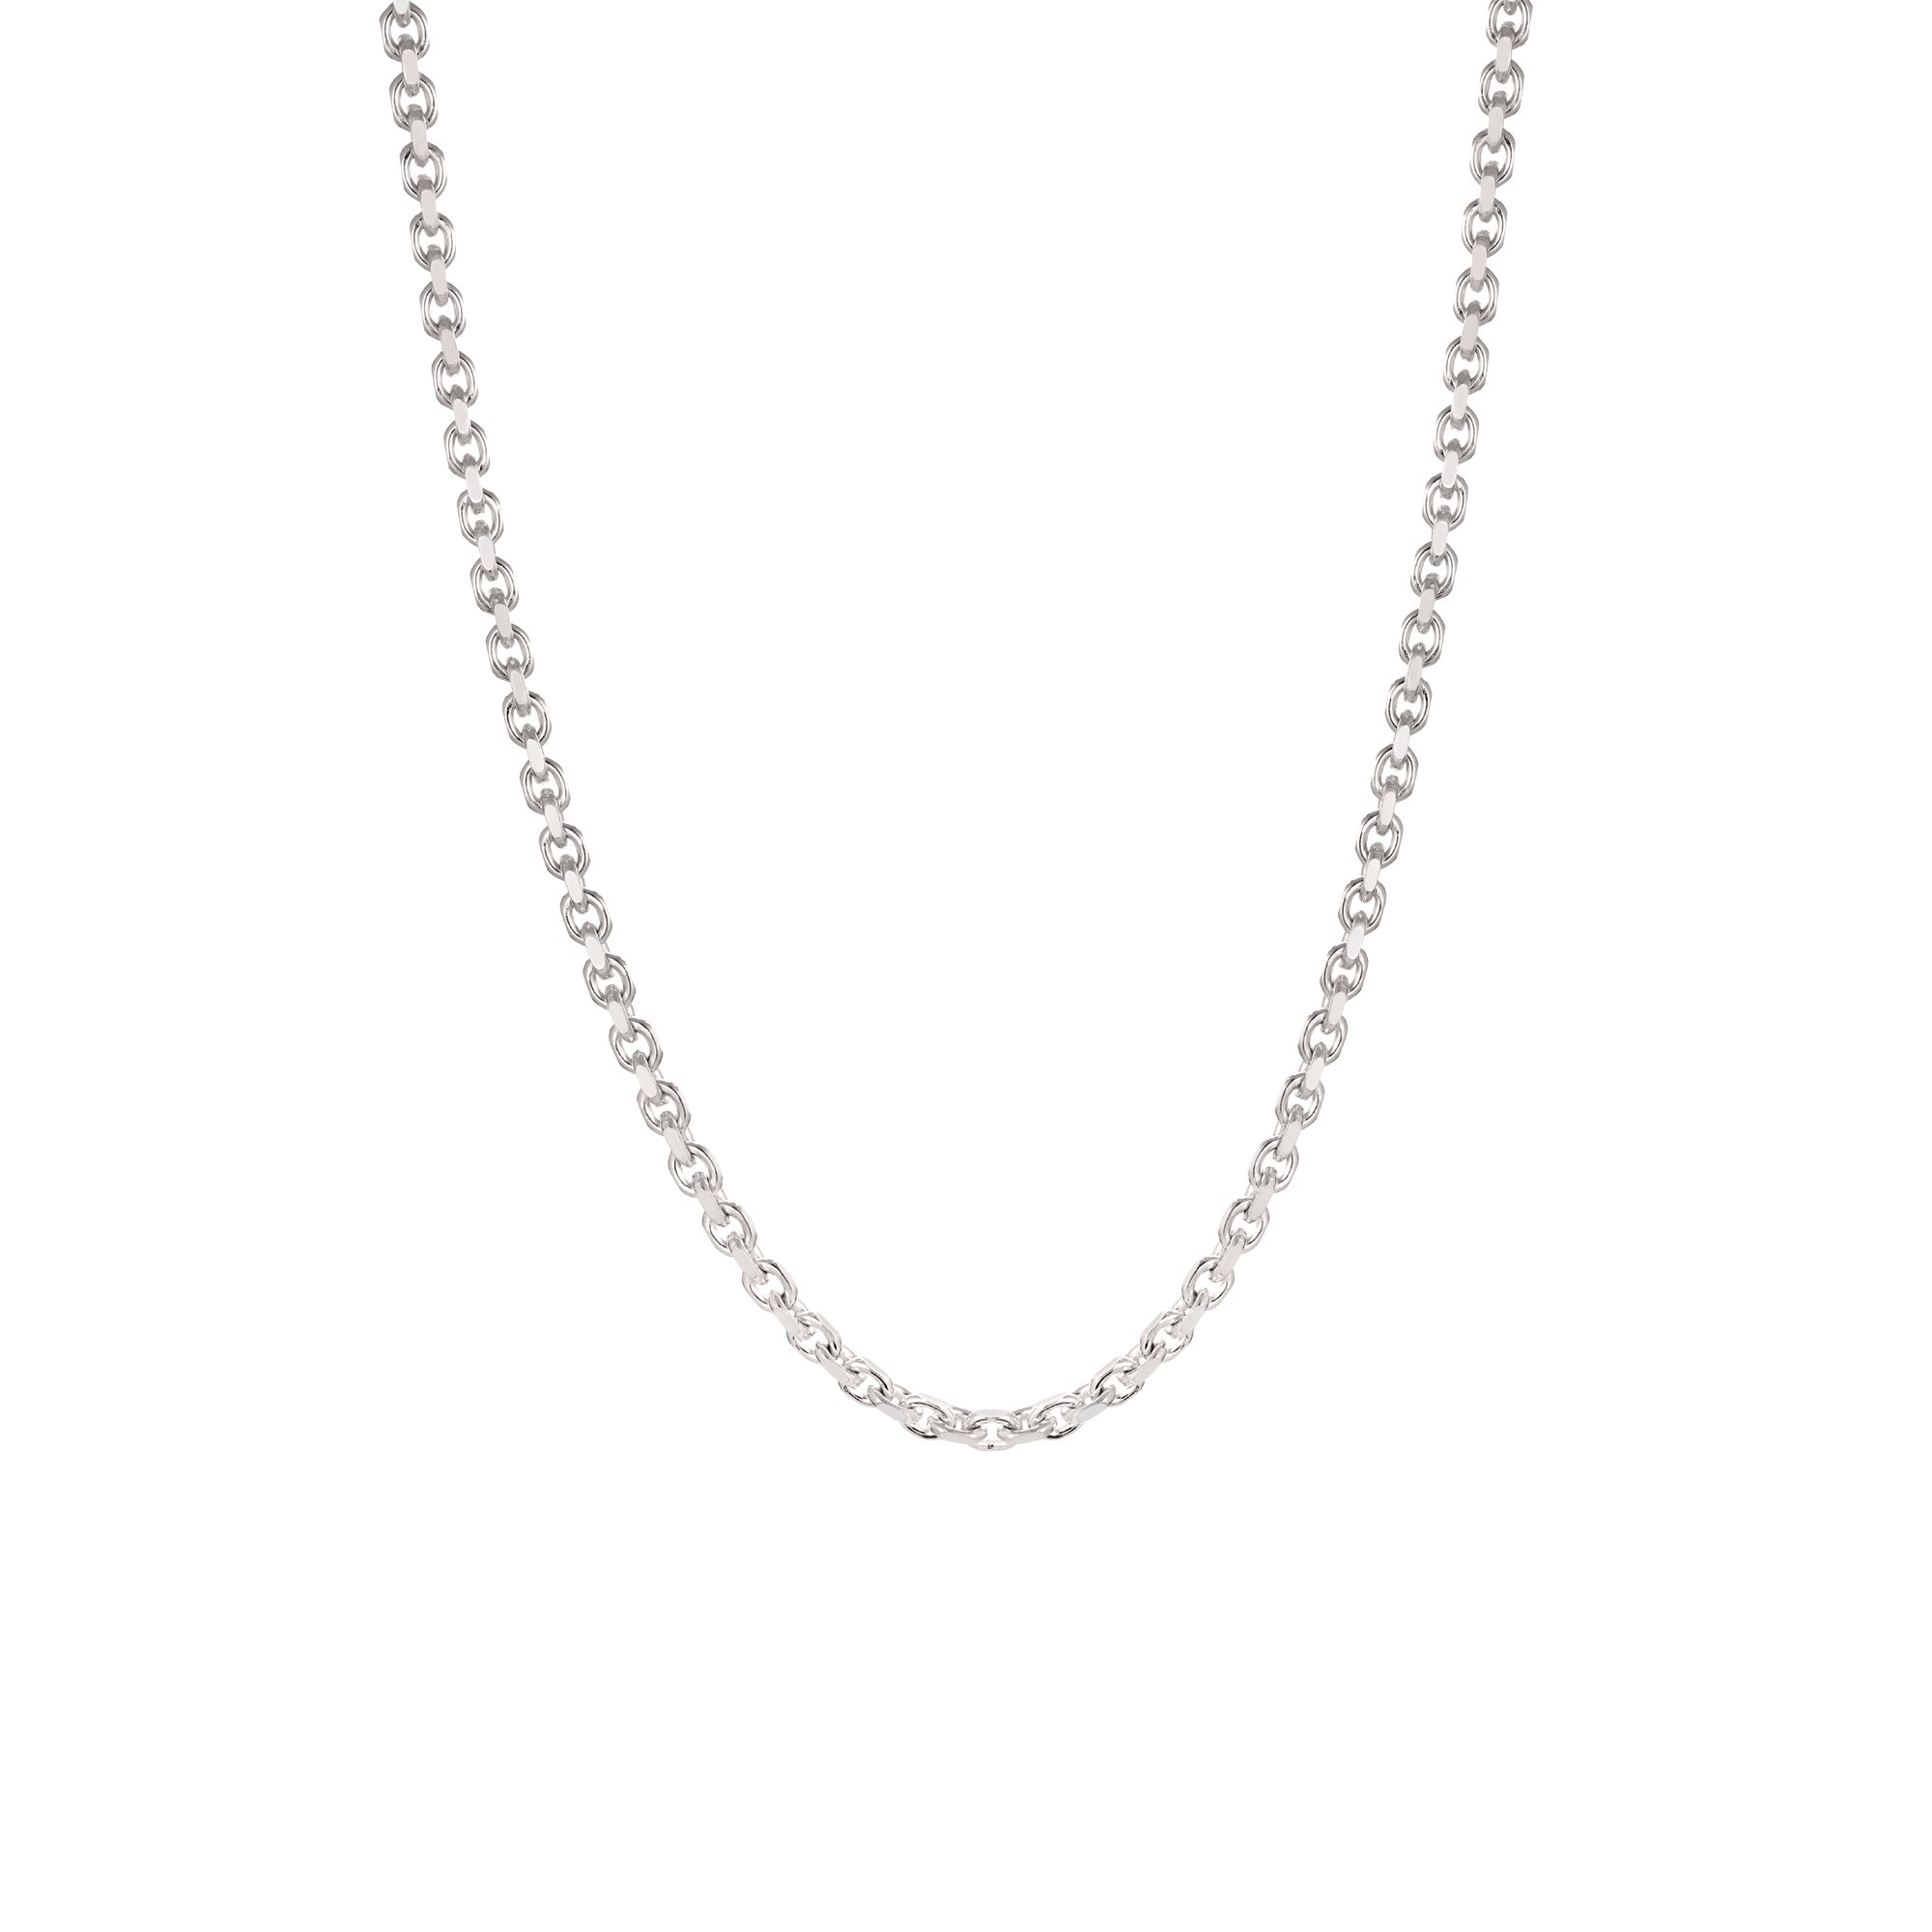 YAB STUDIO Accessories CONNECTED CHAIN 4 Silver